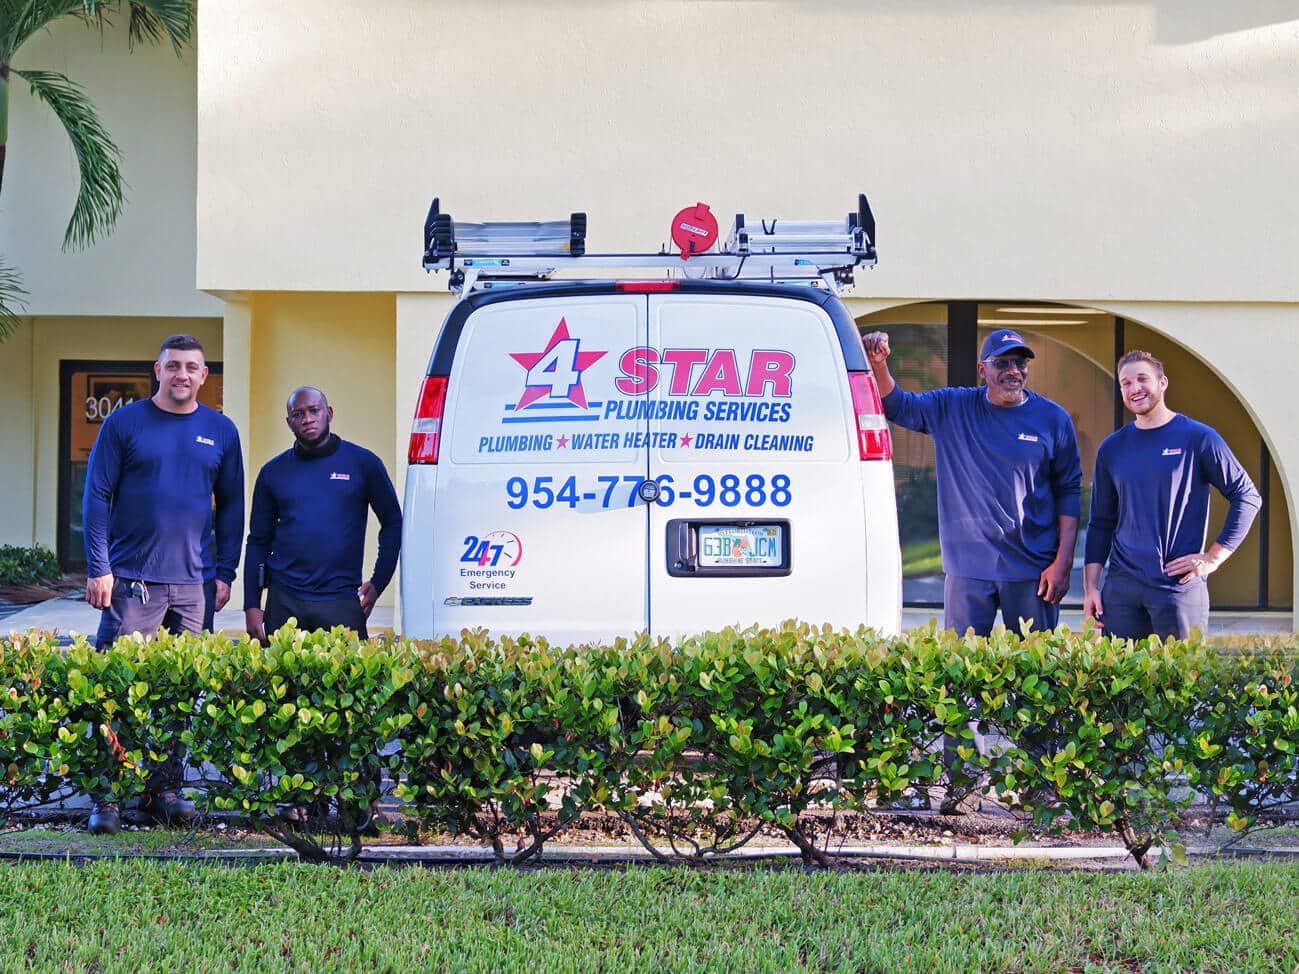 4 Star Plumbing Services van with employees standing by truck